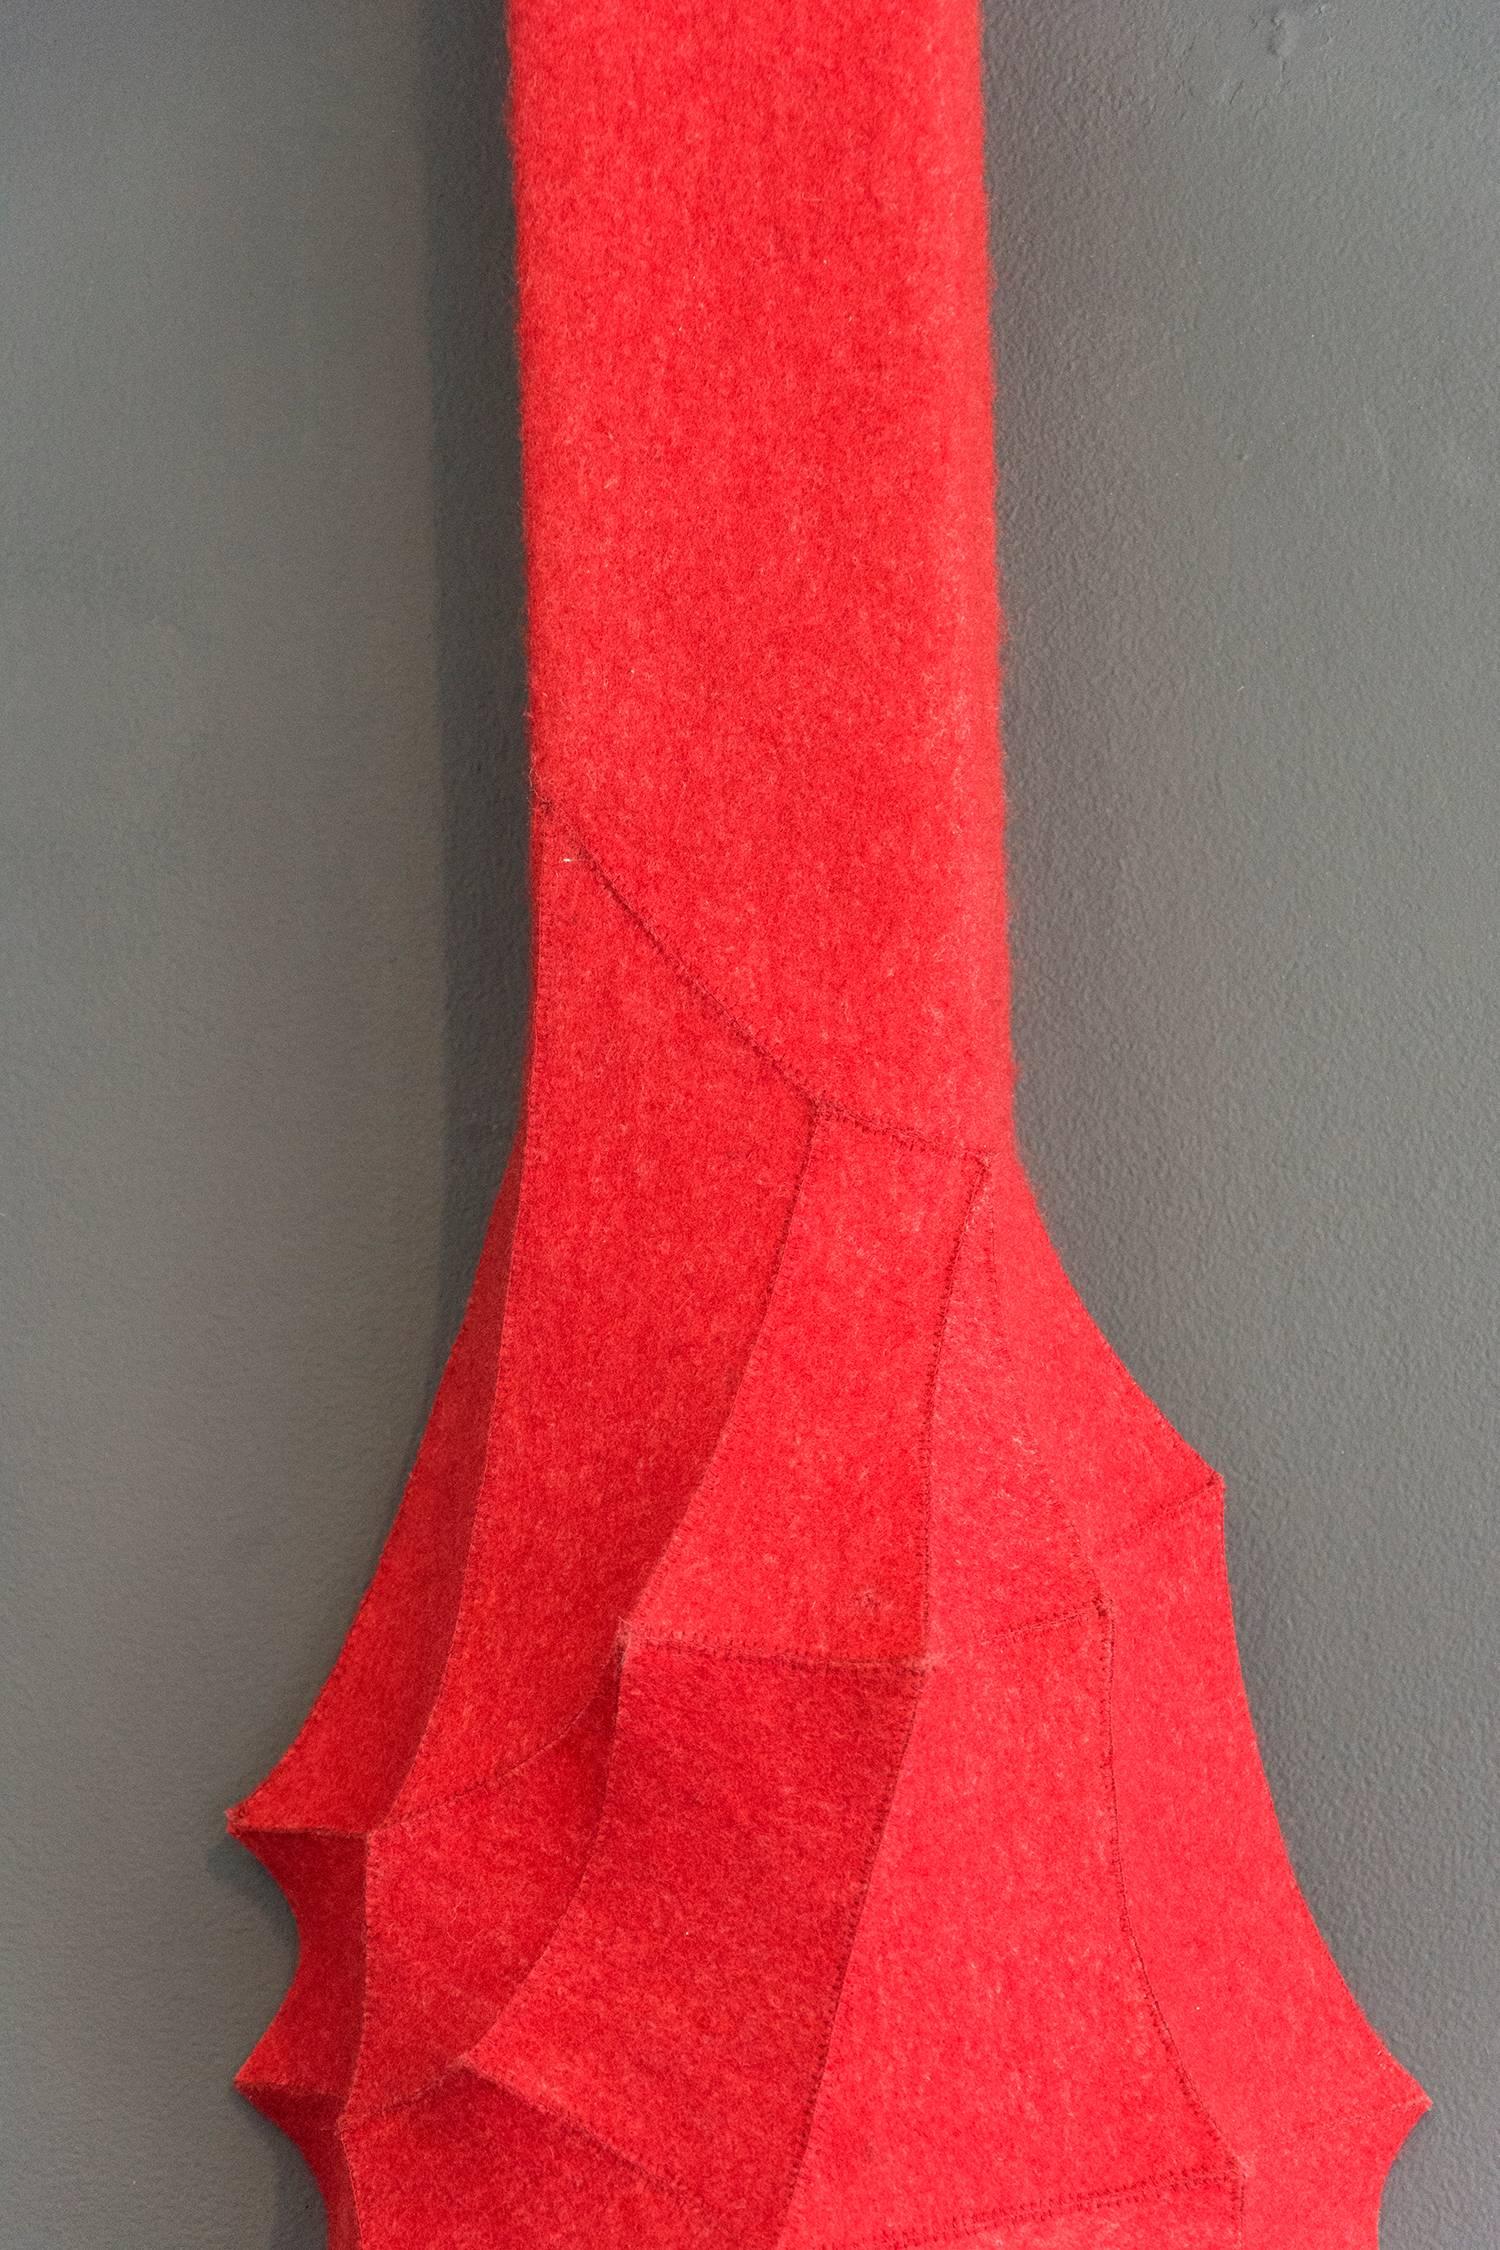 Jaru - crimson red, fabric, abstract, wall sculpture, hanging, textile - Abstract Sculpture by Chung-Im Kim